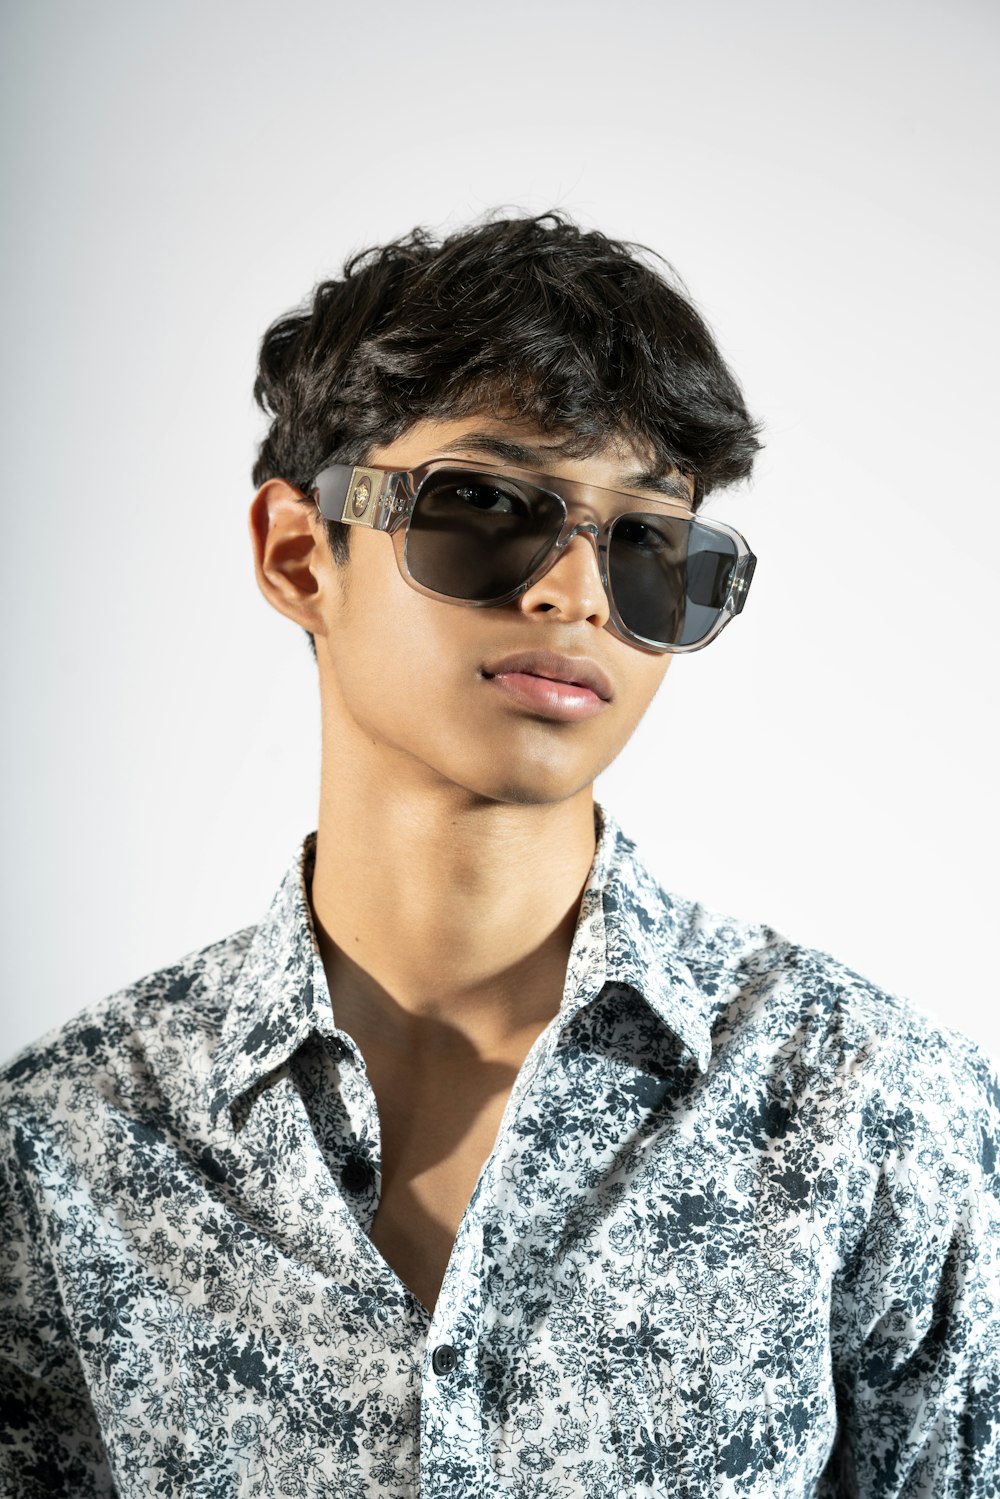 a young man wearing sunglasses and a shirt